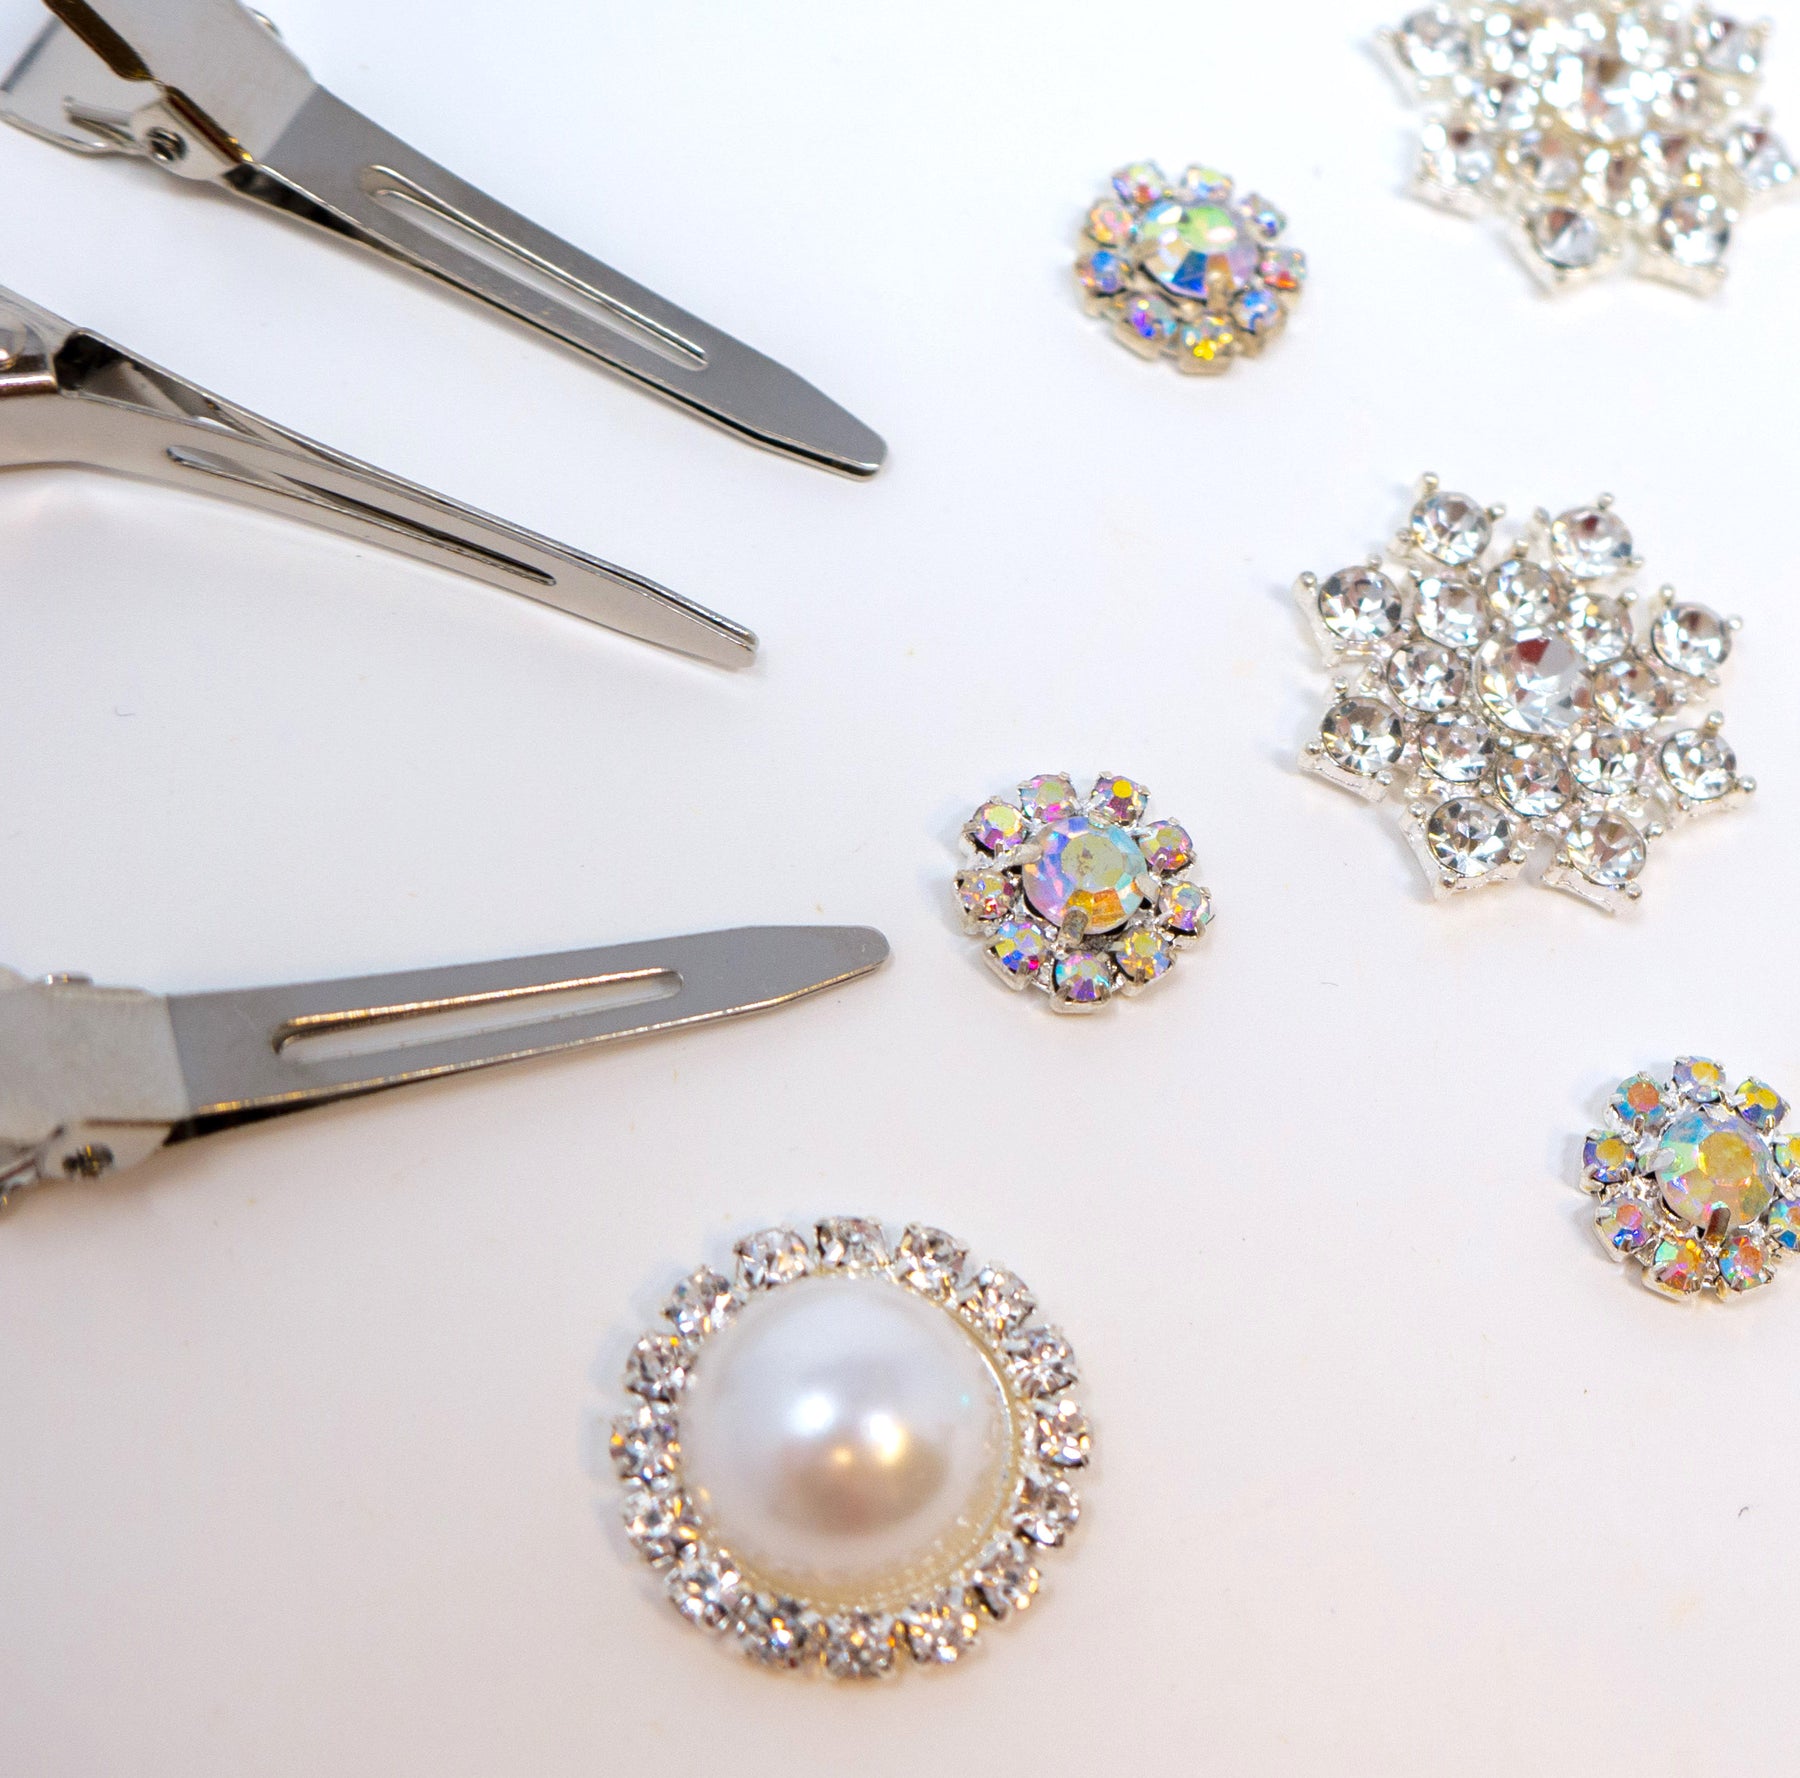 The highest quality of metal and plastic hardware available on the market for hair accessories. Our hardwards catalog includes clips, headbands, single prong clips, barrettes, snap clips and more. Perfect bling and rhinestone additions as well.